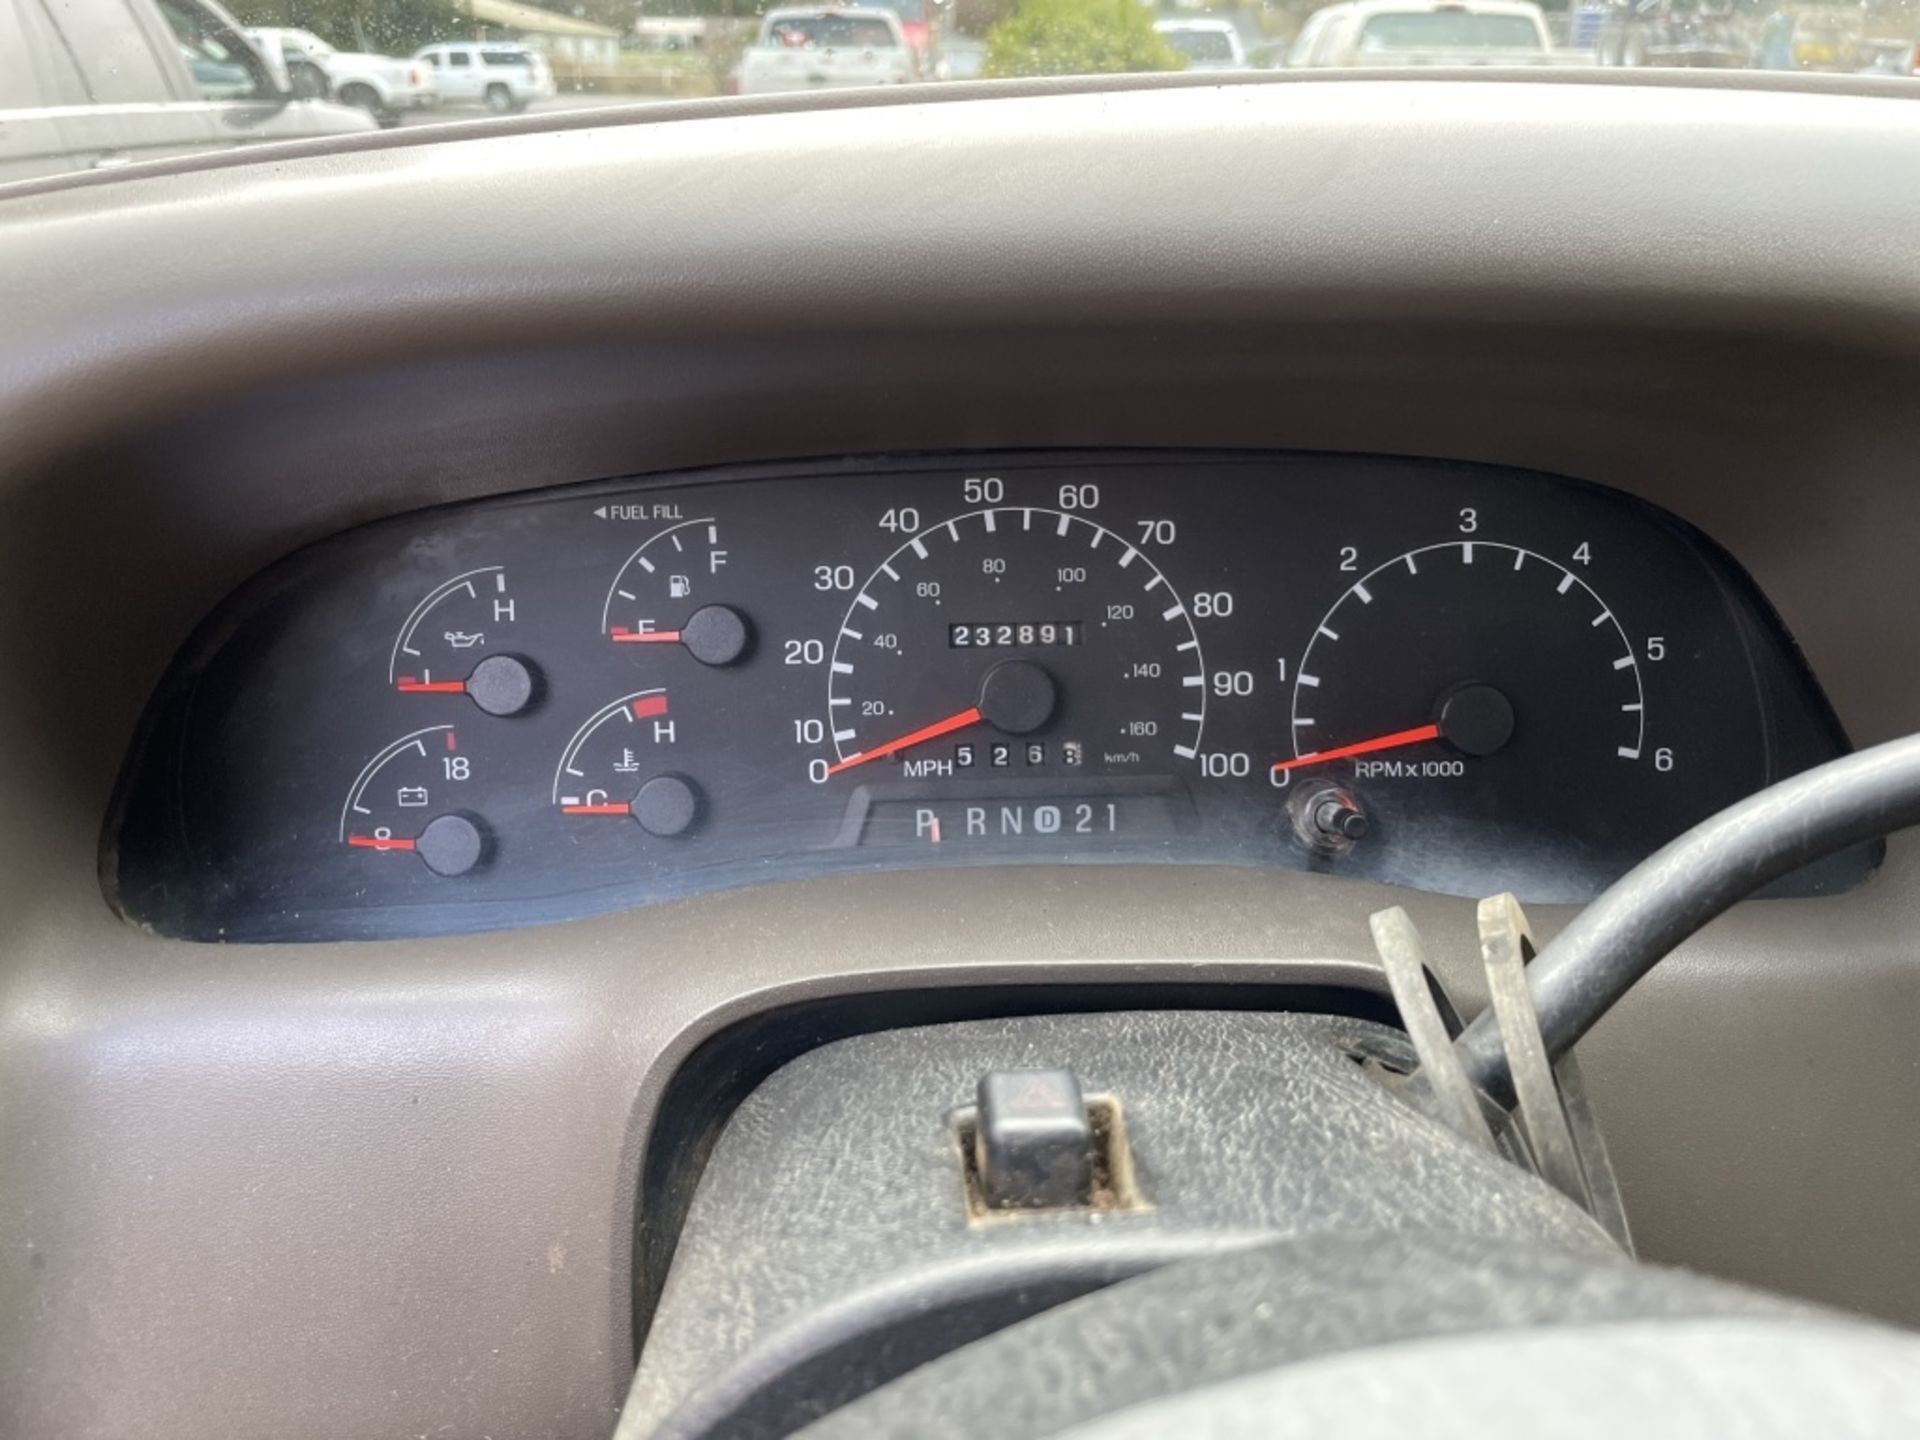 2000 Ford F250 XLT SD 4x4 Extra Cab Pickup - Image 8 of 14